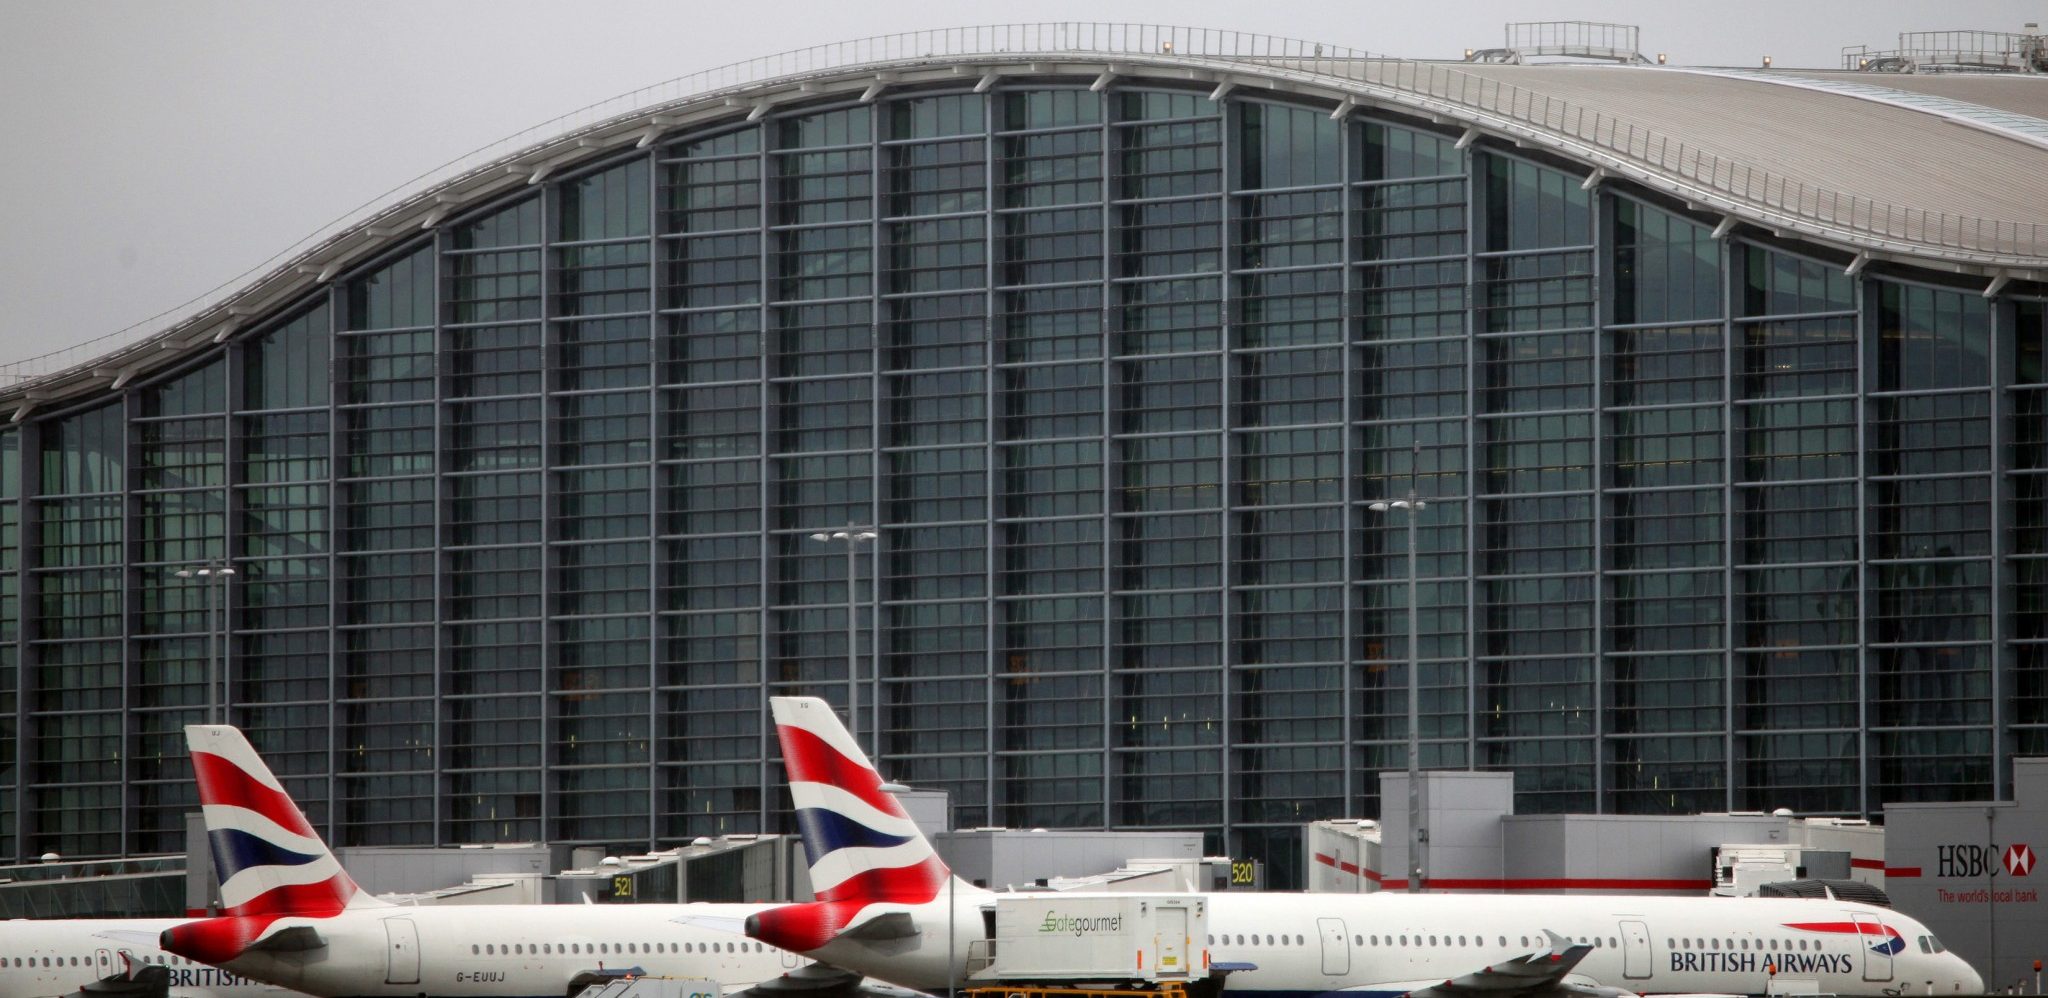 Last-ditch talks made to avert strike action at London Heathrow